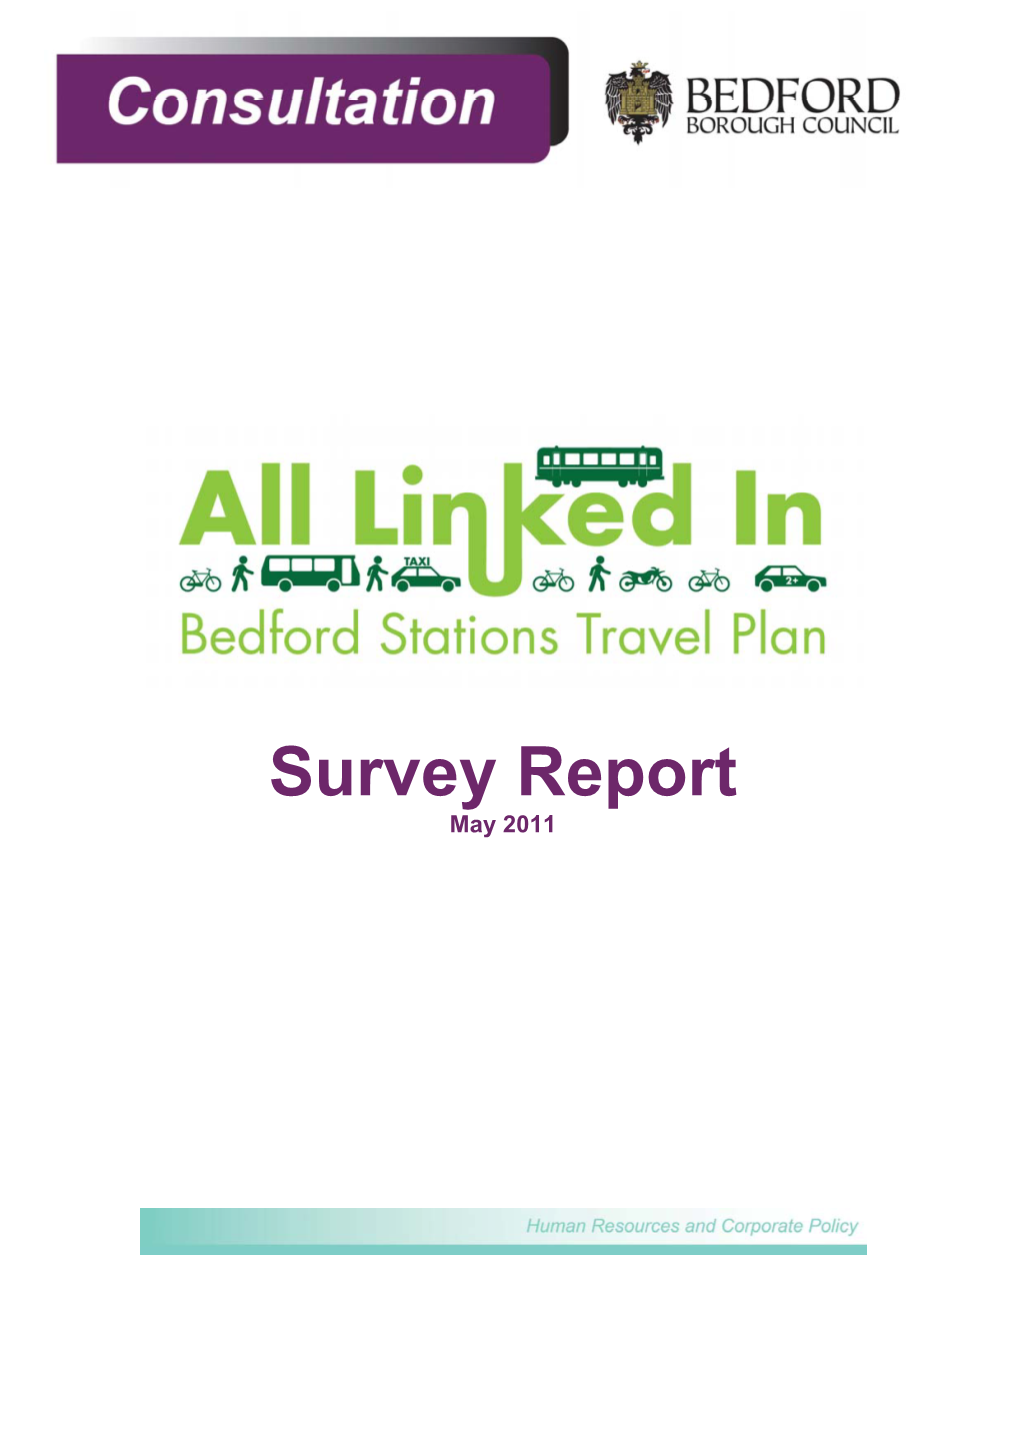 Survey Report May 2011